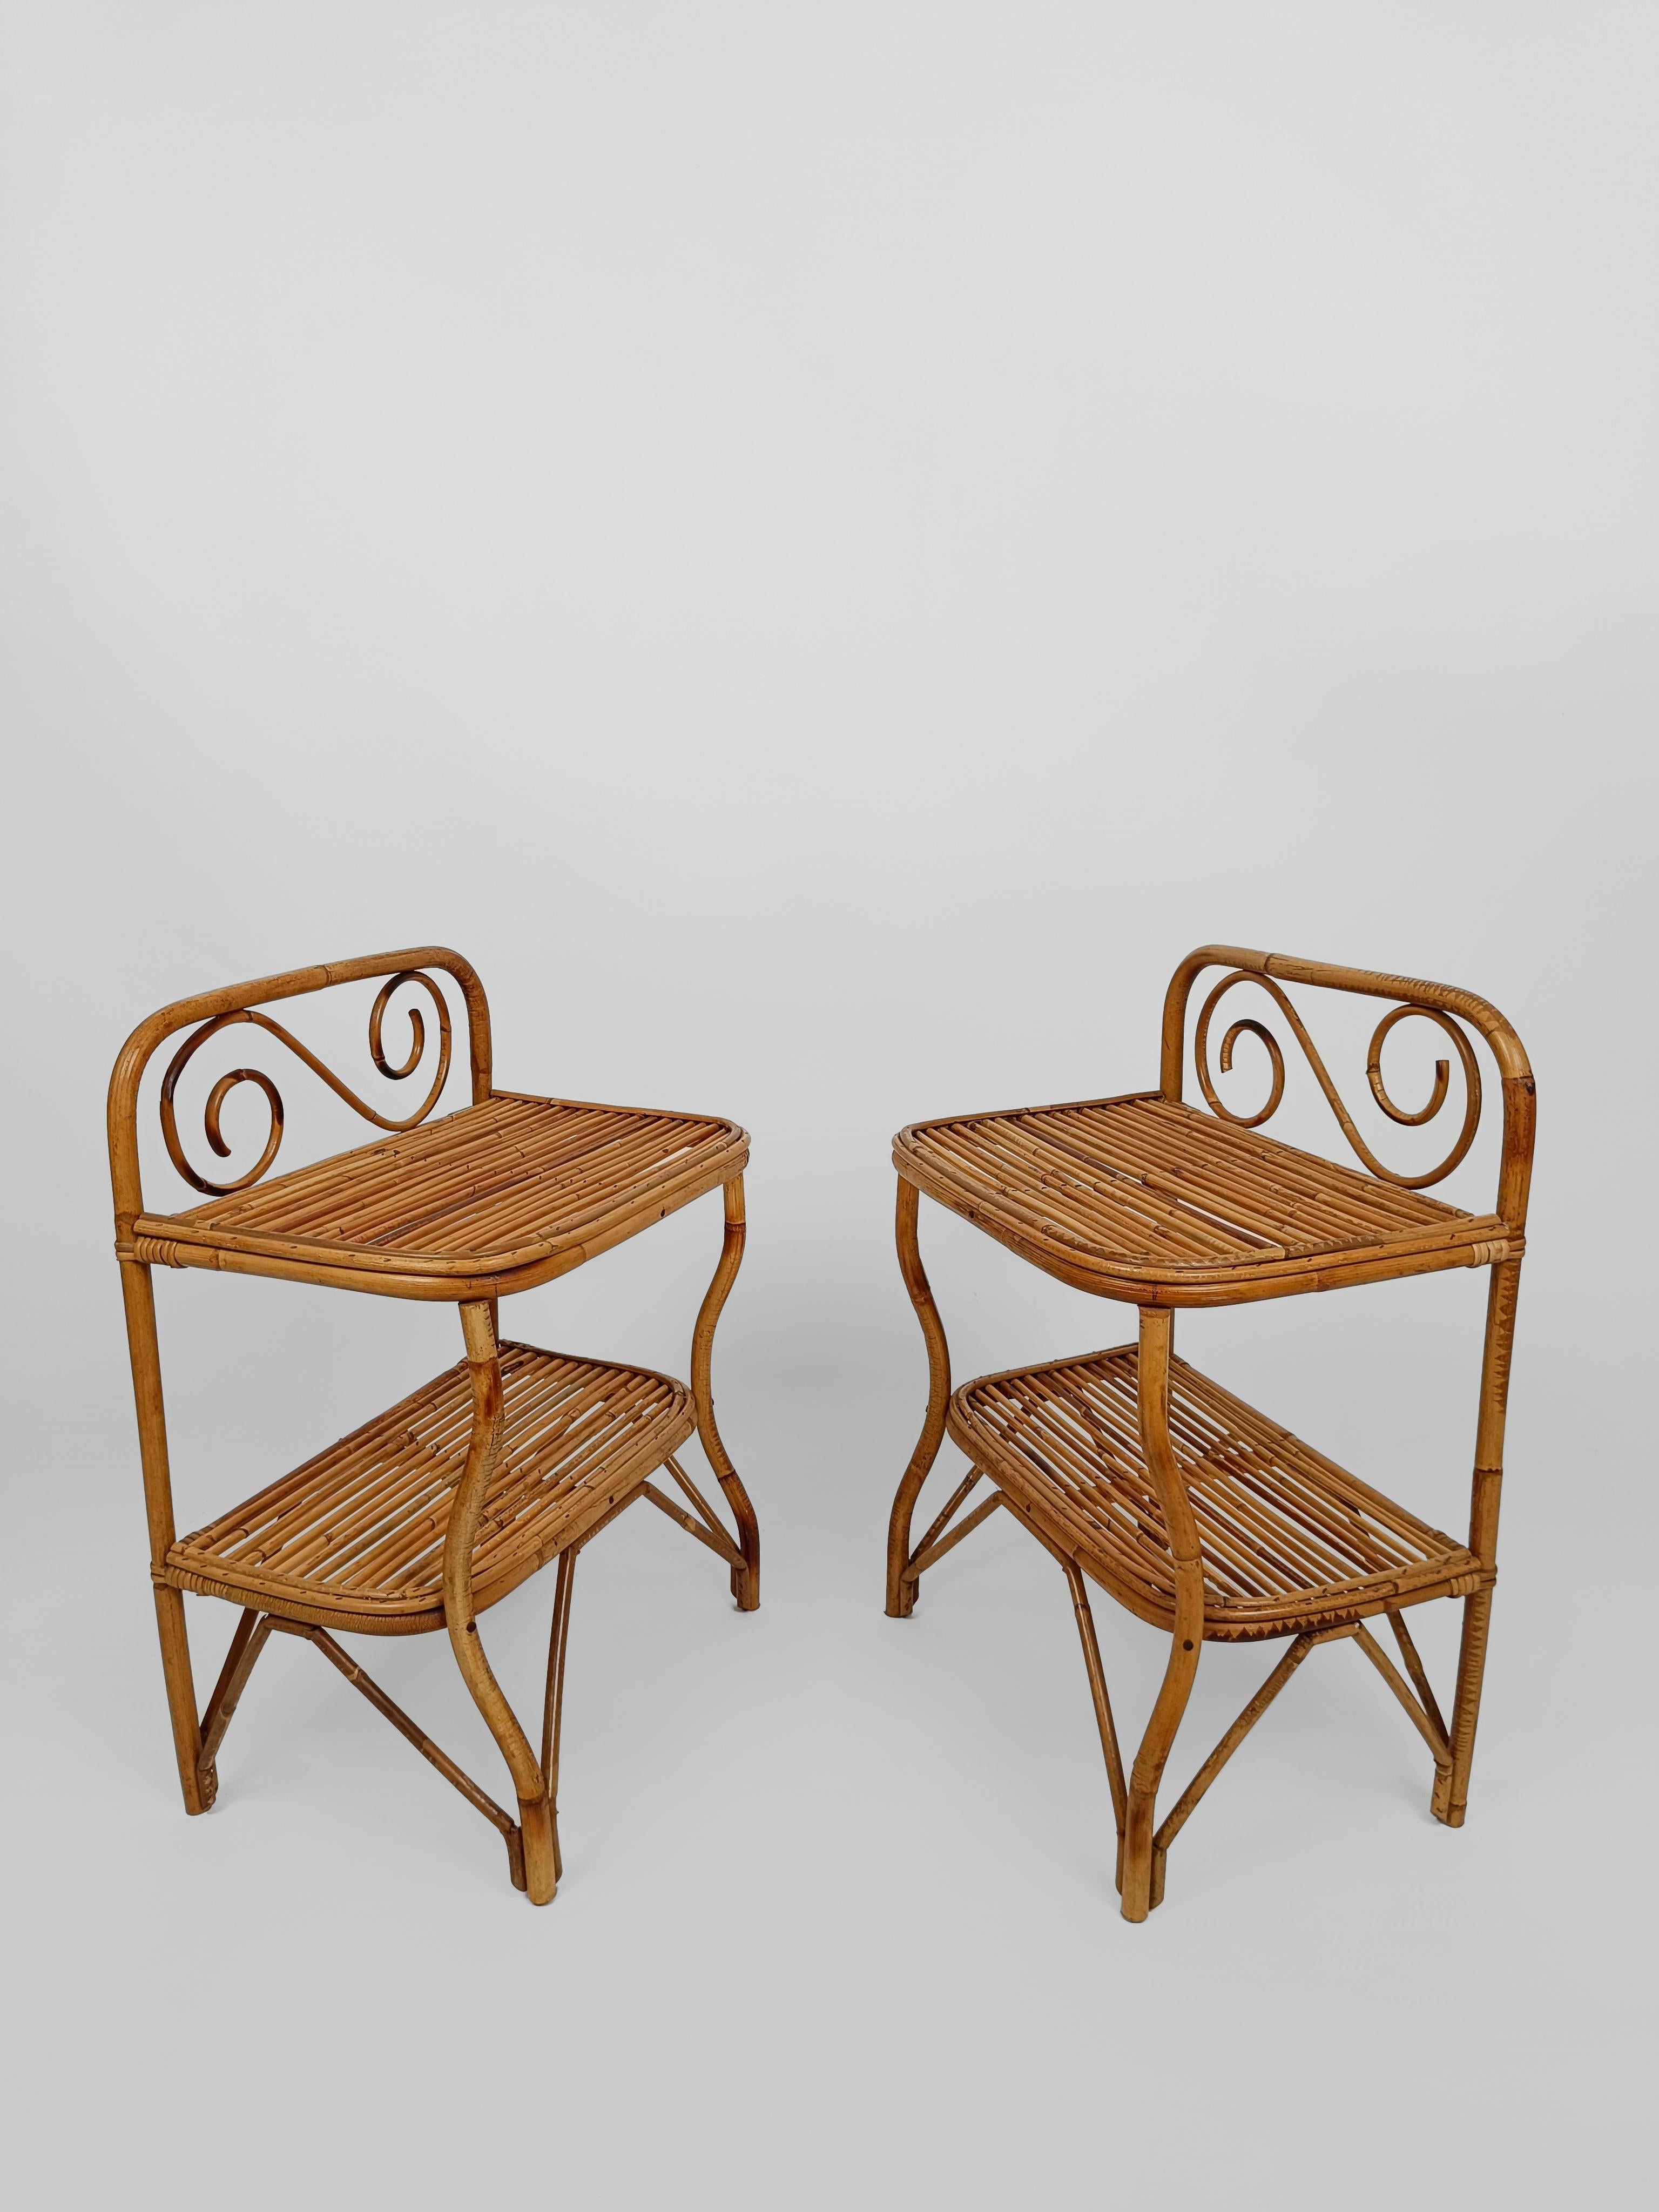 Pair of Italian Bedside Table Nightstands in Bamboo, Rattan and Cane, 1960s  For Sale 2